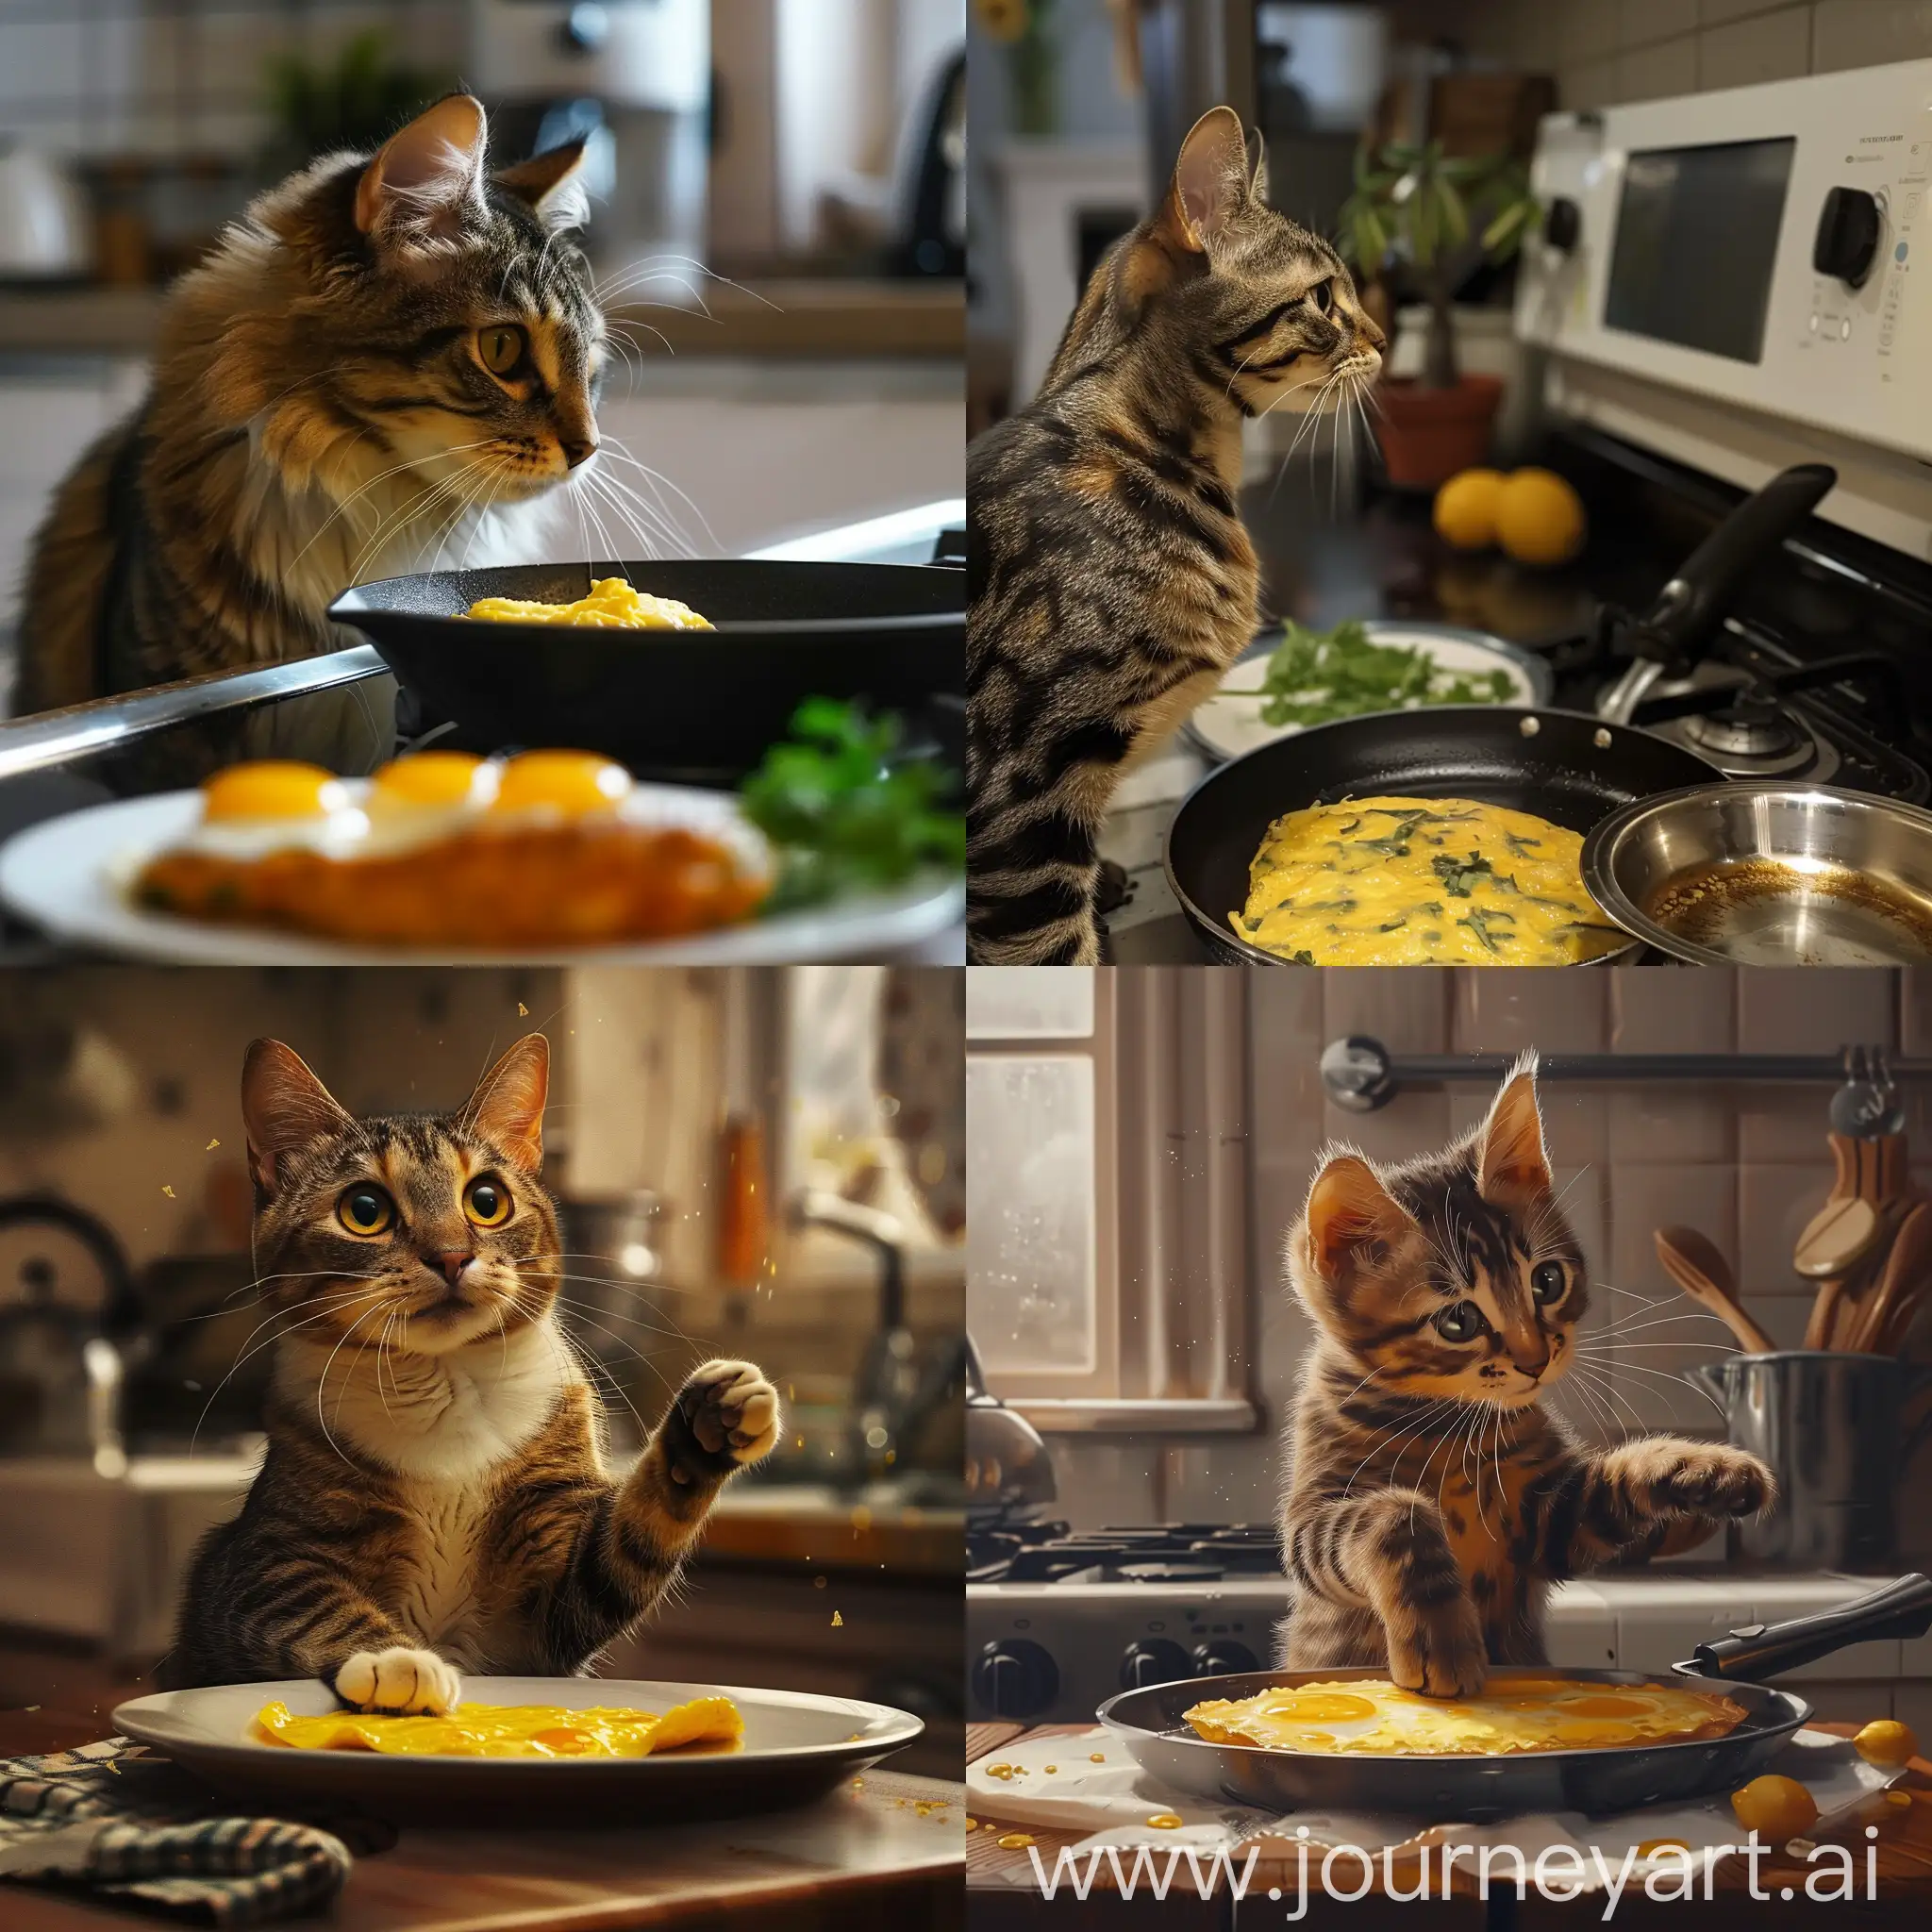 Adventurous-Cat-Attempts-Omelette-Cooking-in-Kitchen